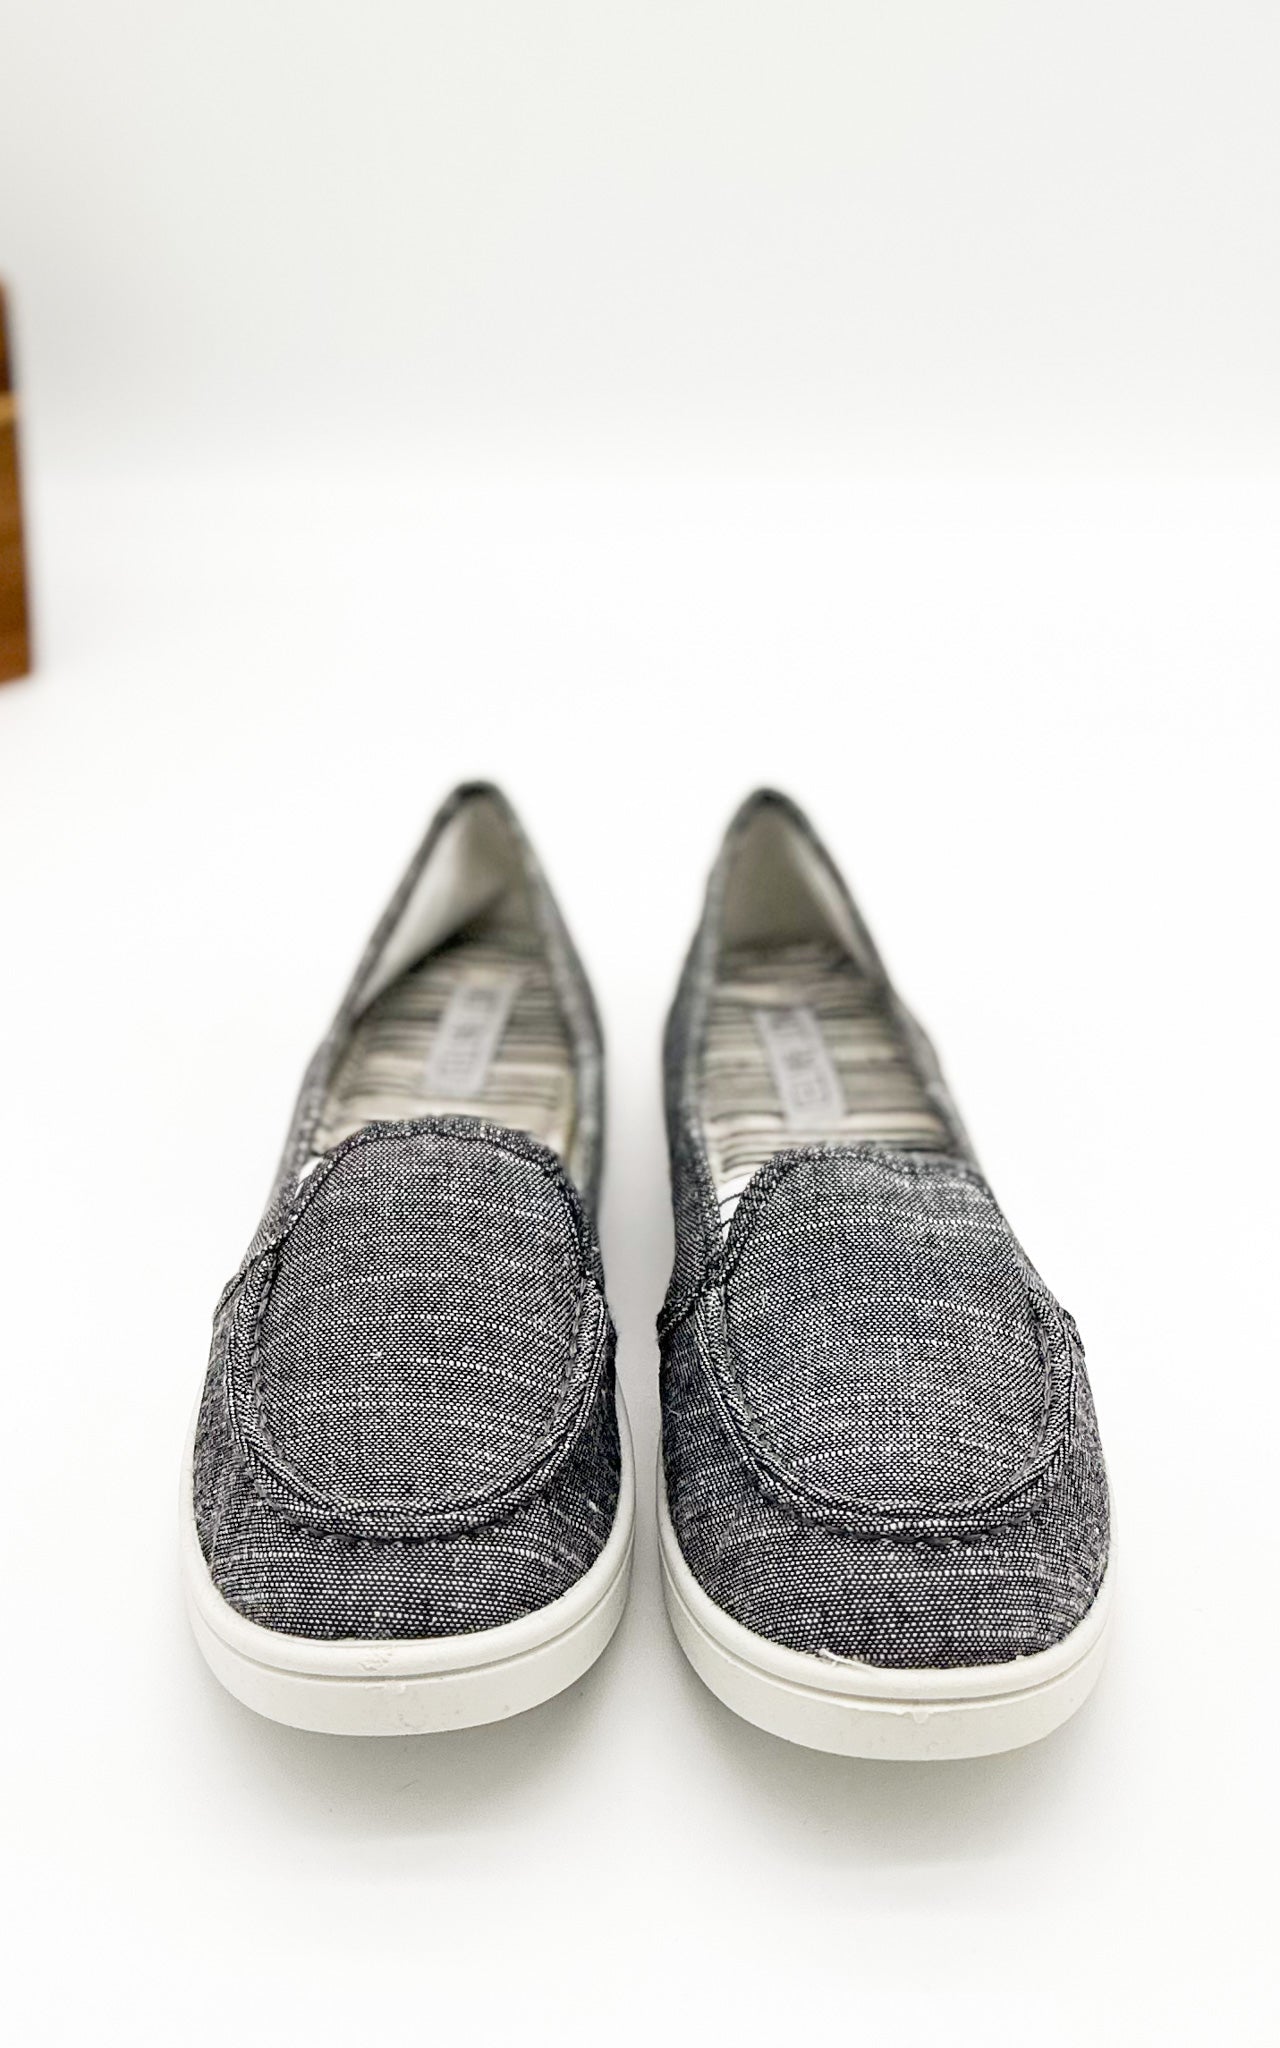 Not Rated Mackerel Sneaker in Charcoal